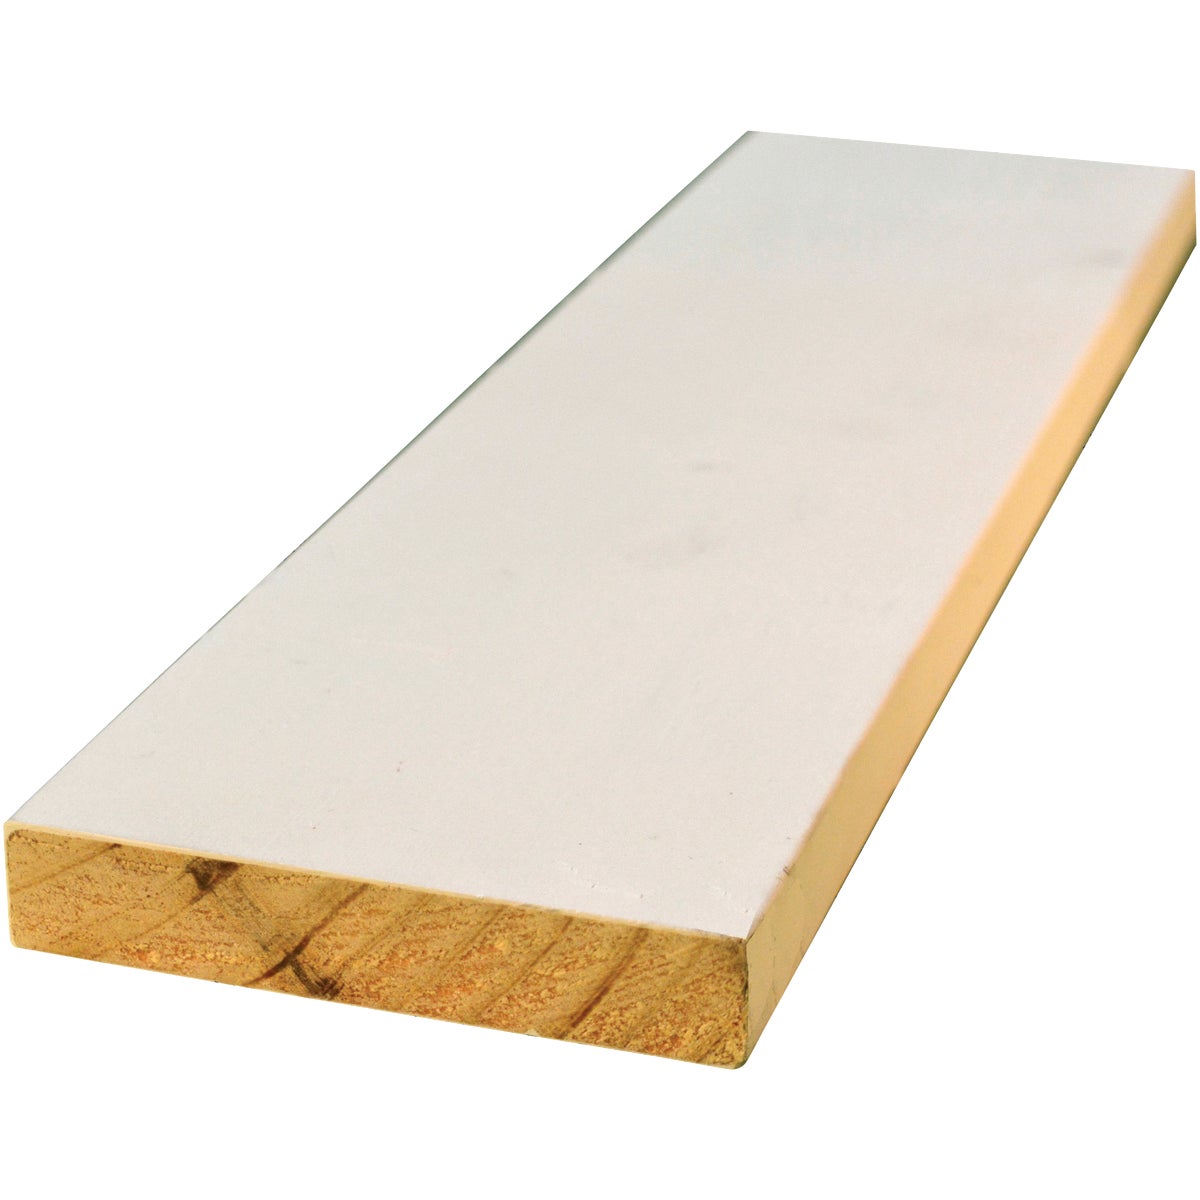 Alexandria Moulding 1 In. W. x 4 In. H. x 8 Ft. L. White Finger Joint Pine Board